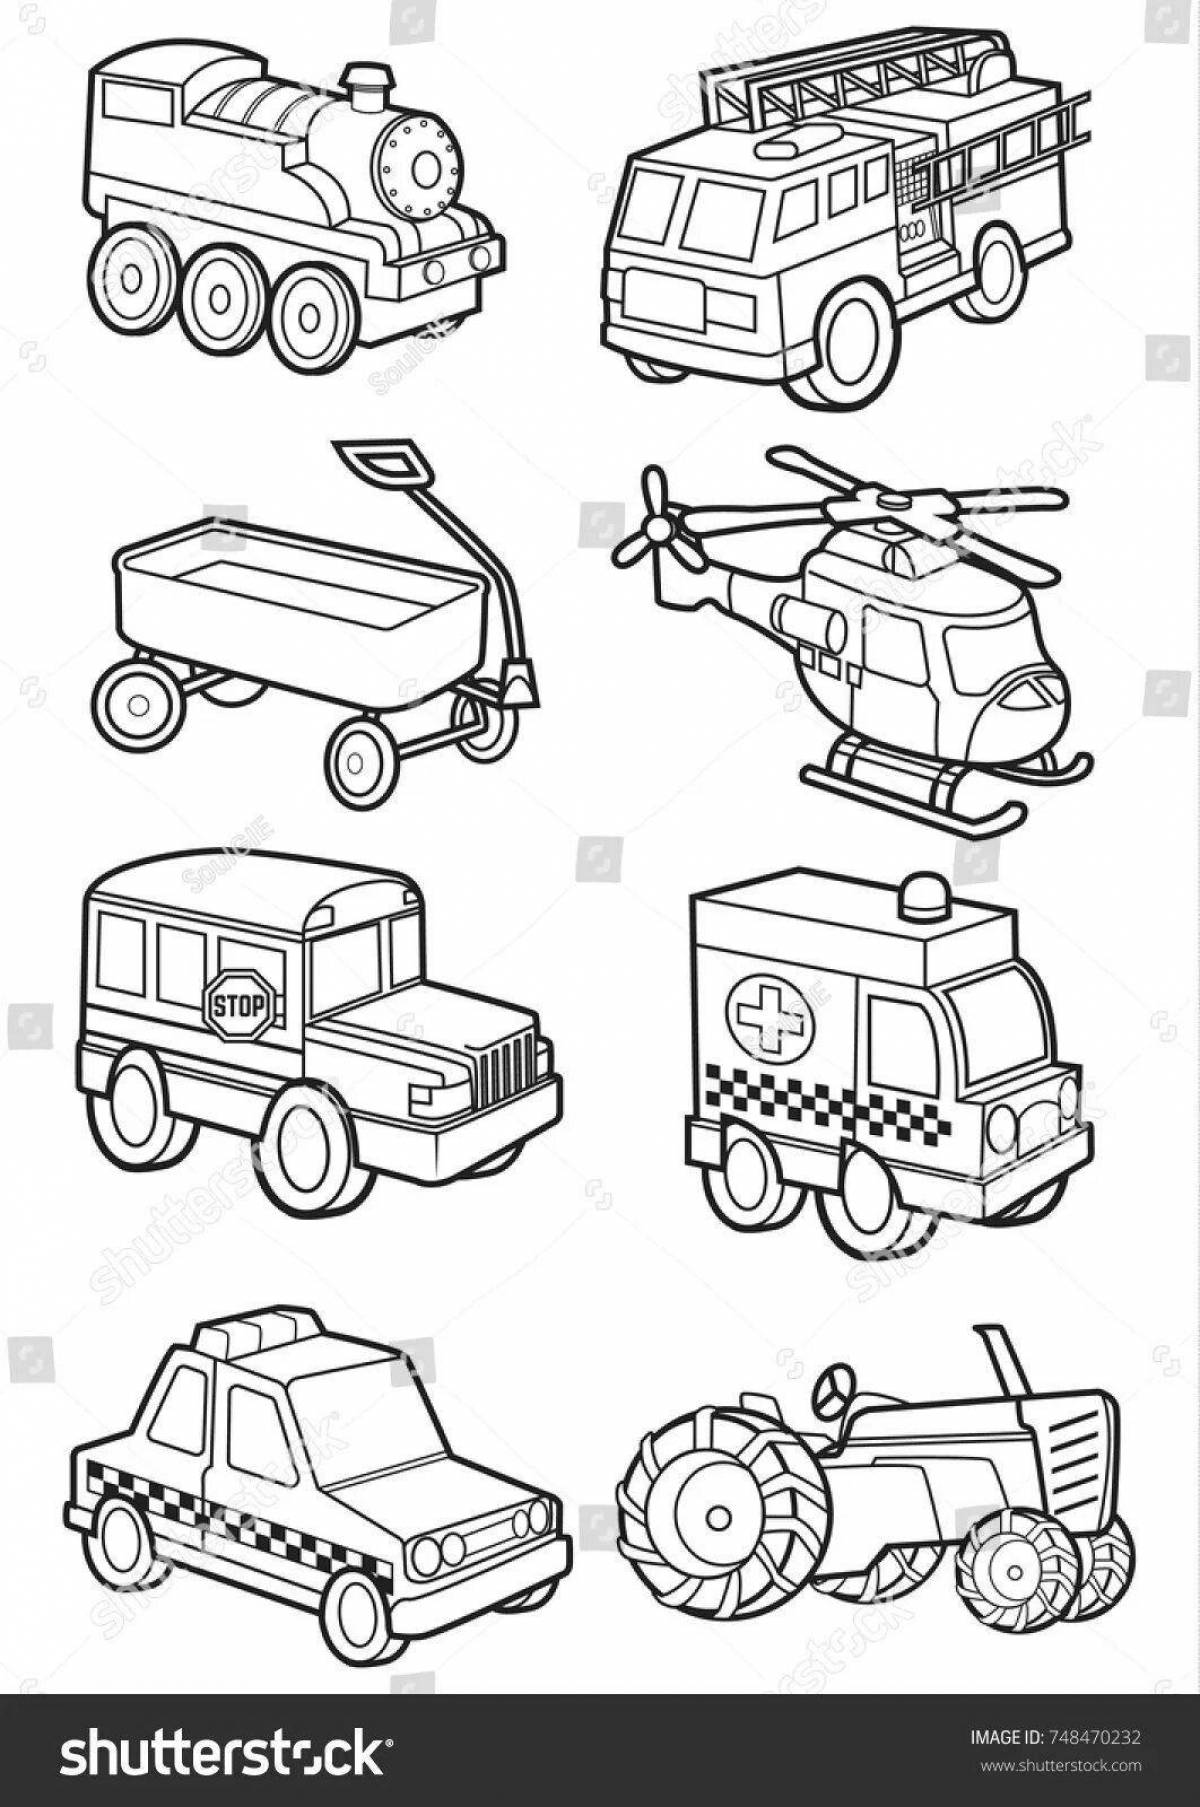 Bright coloring of special vehicles for children